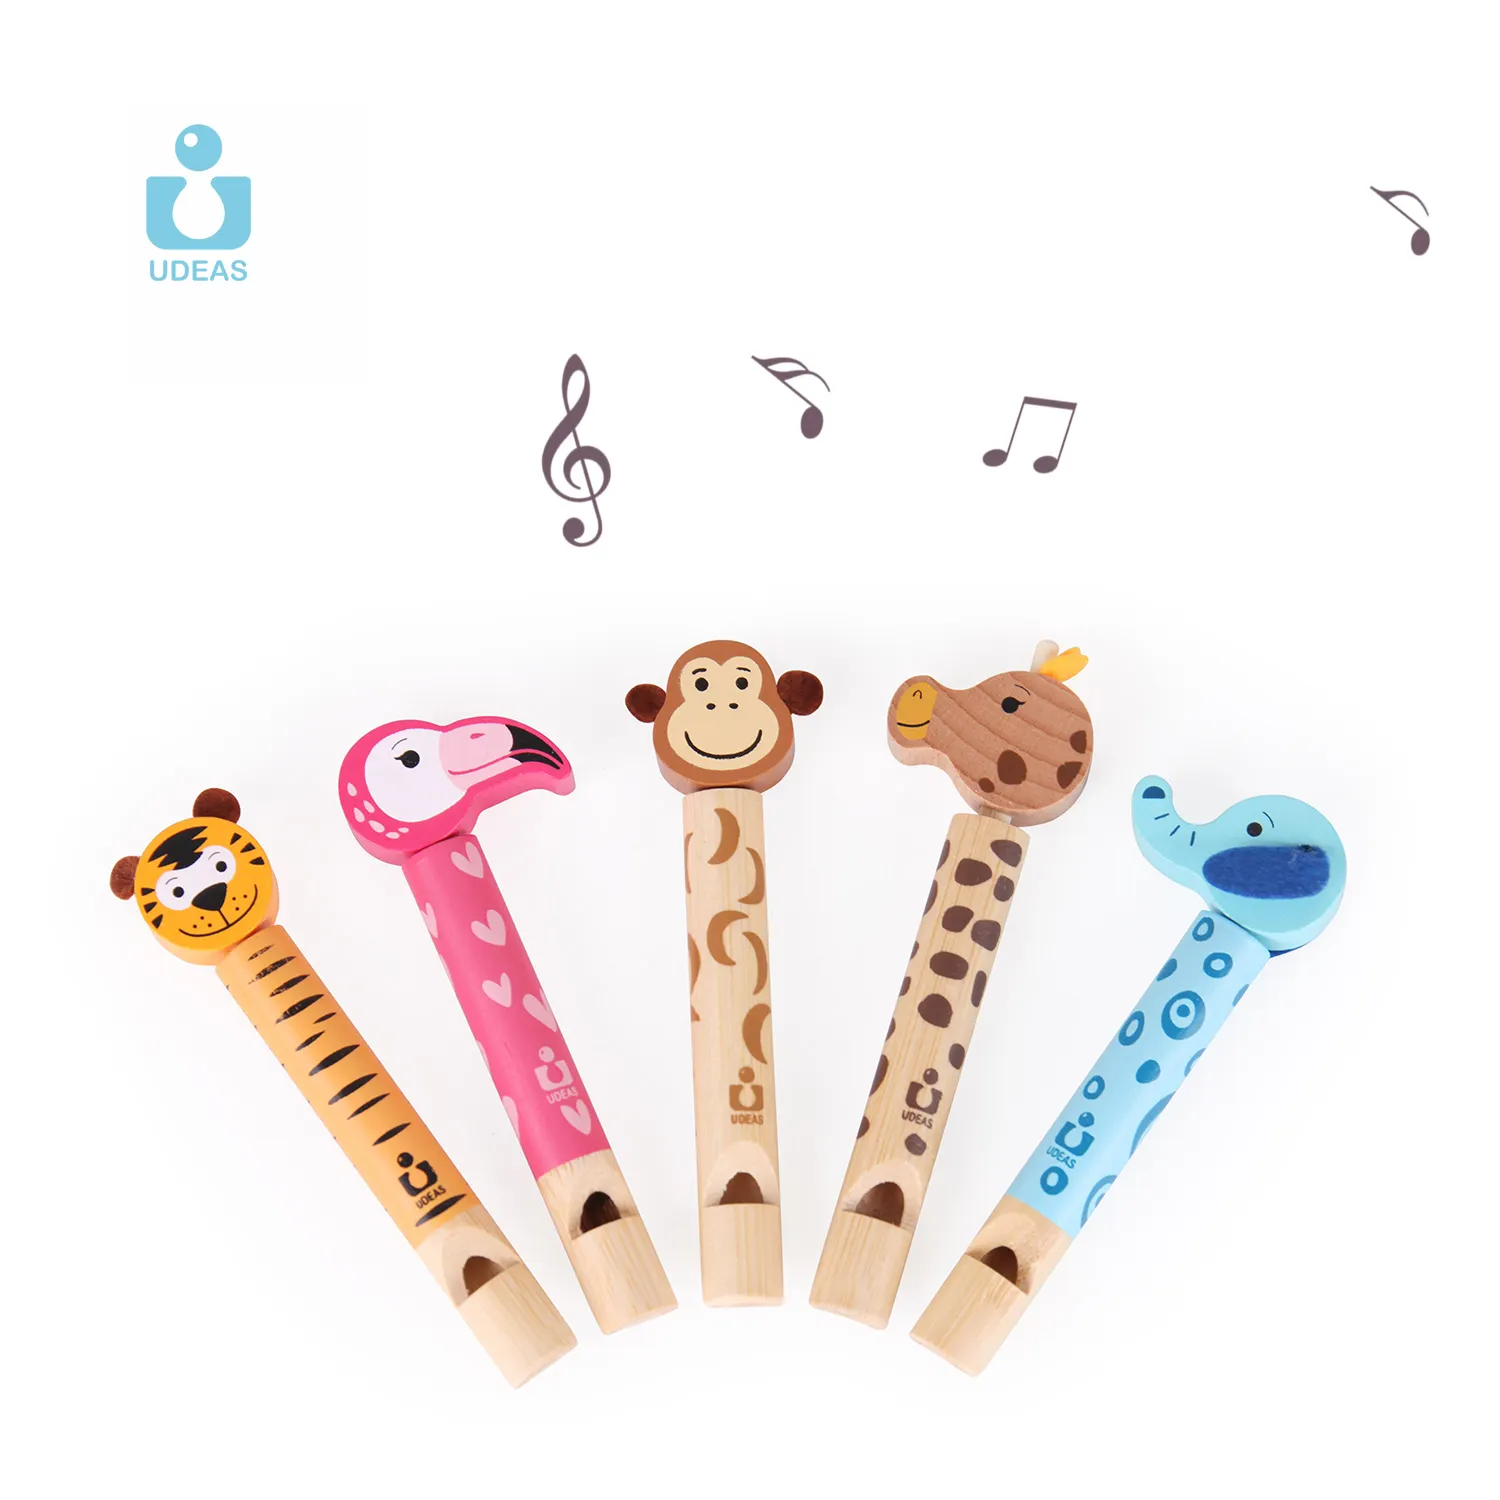 UDEAS High Quality Bamboo Toys Kids Educational Musical Instruments Wooden Bamboo whistles Toy